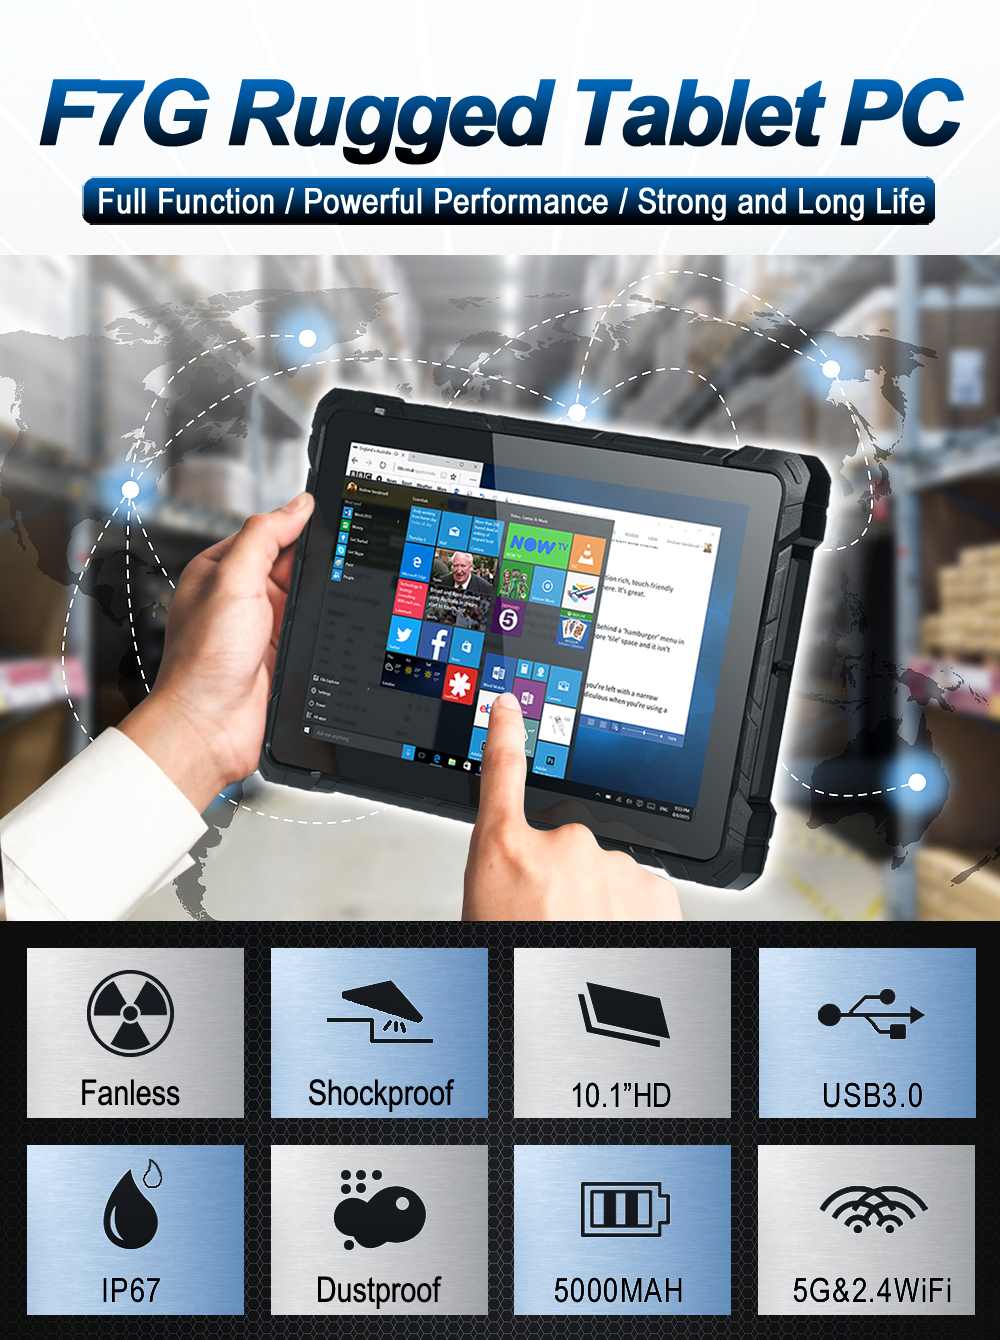 IP67 Rugged Tablet PC